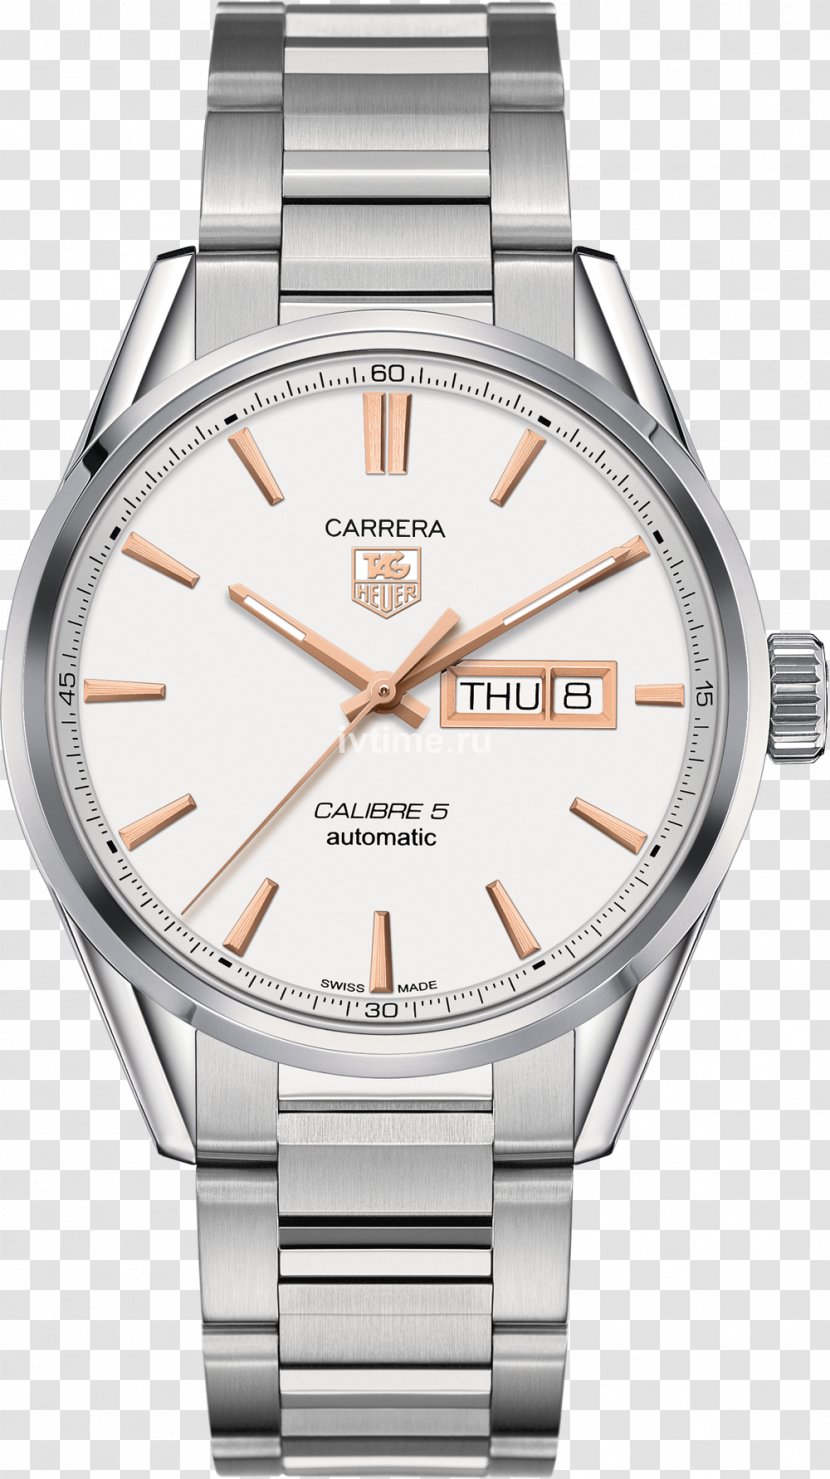 TAG Heuer Carrera Calibre 5 Day-Date Automatic Watch - Tag 16 Daydate Transparent PNG